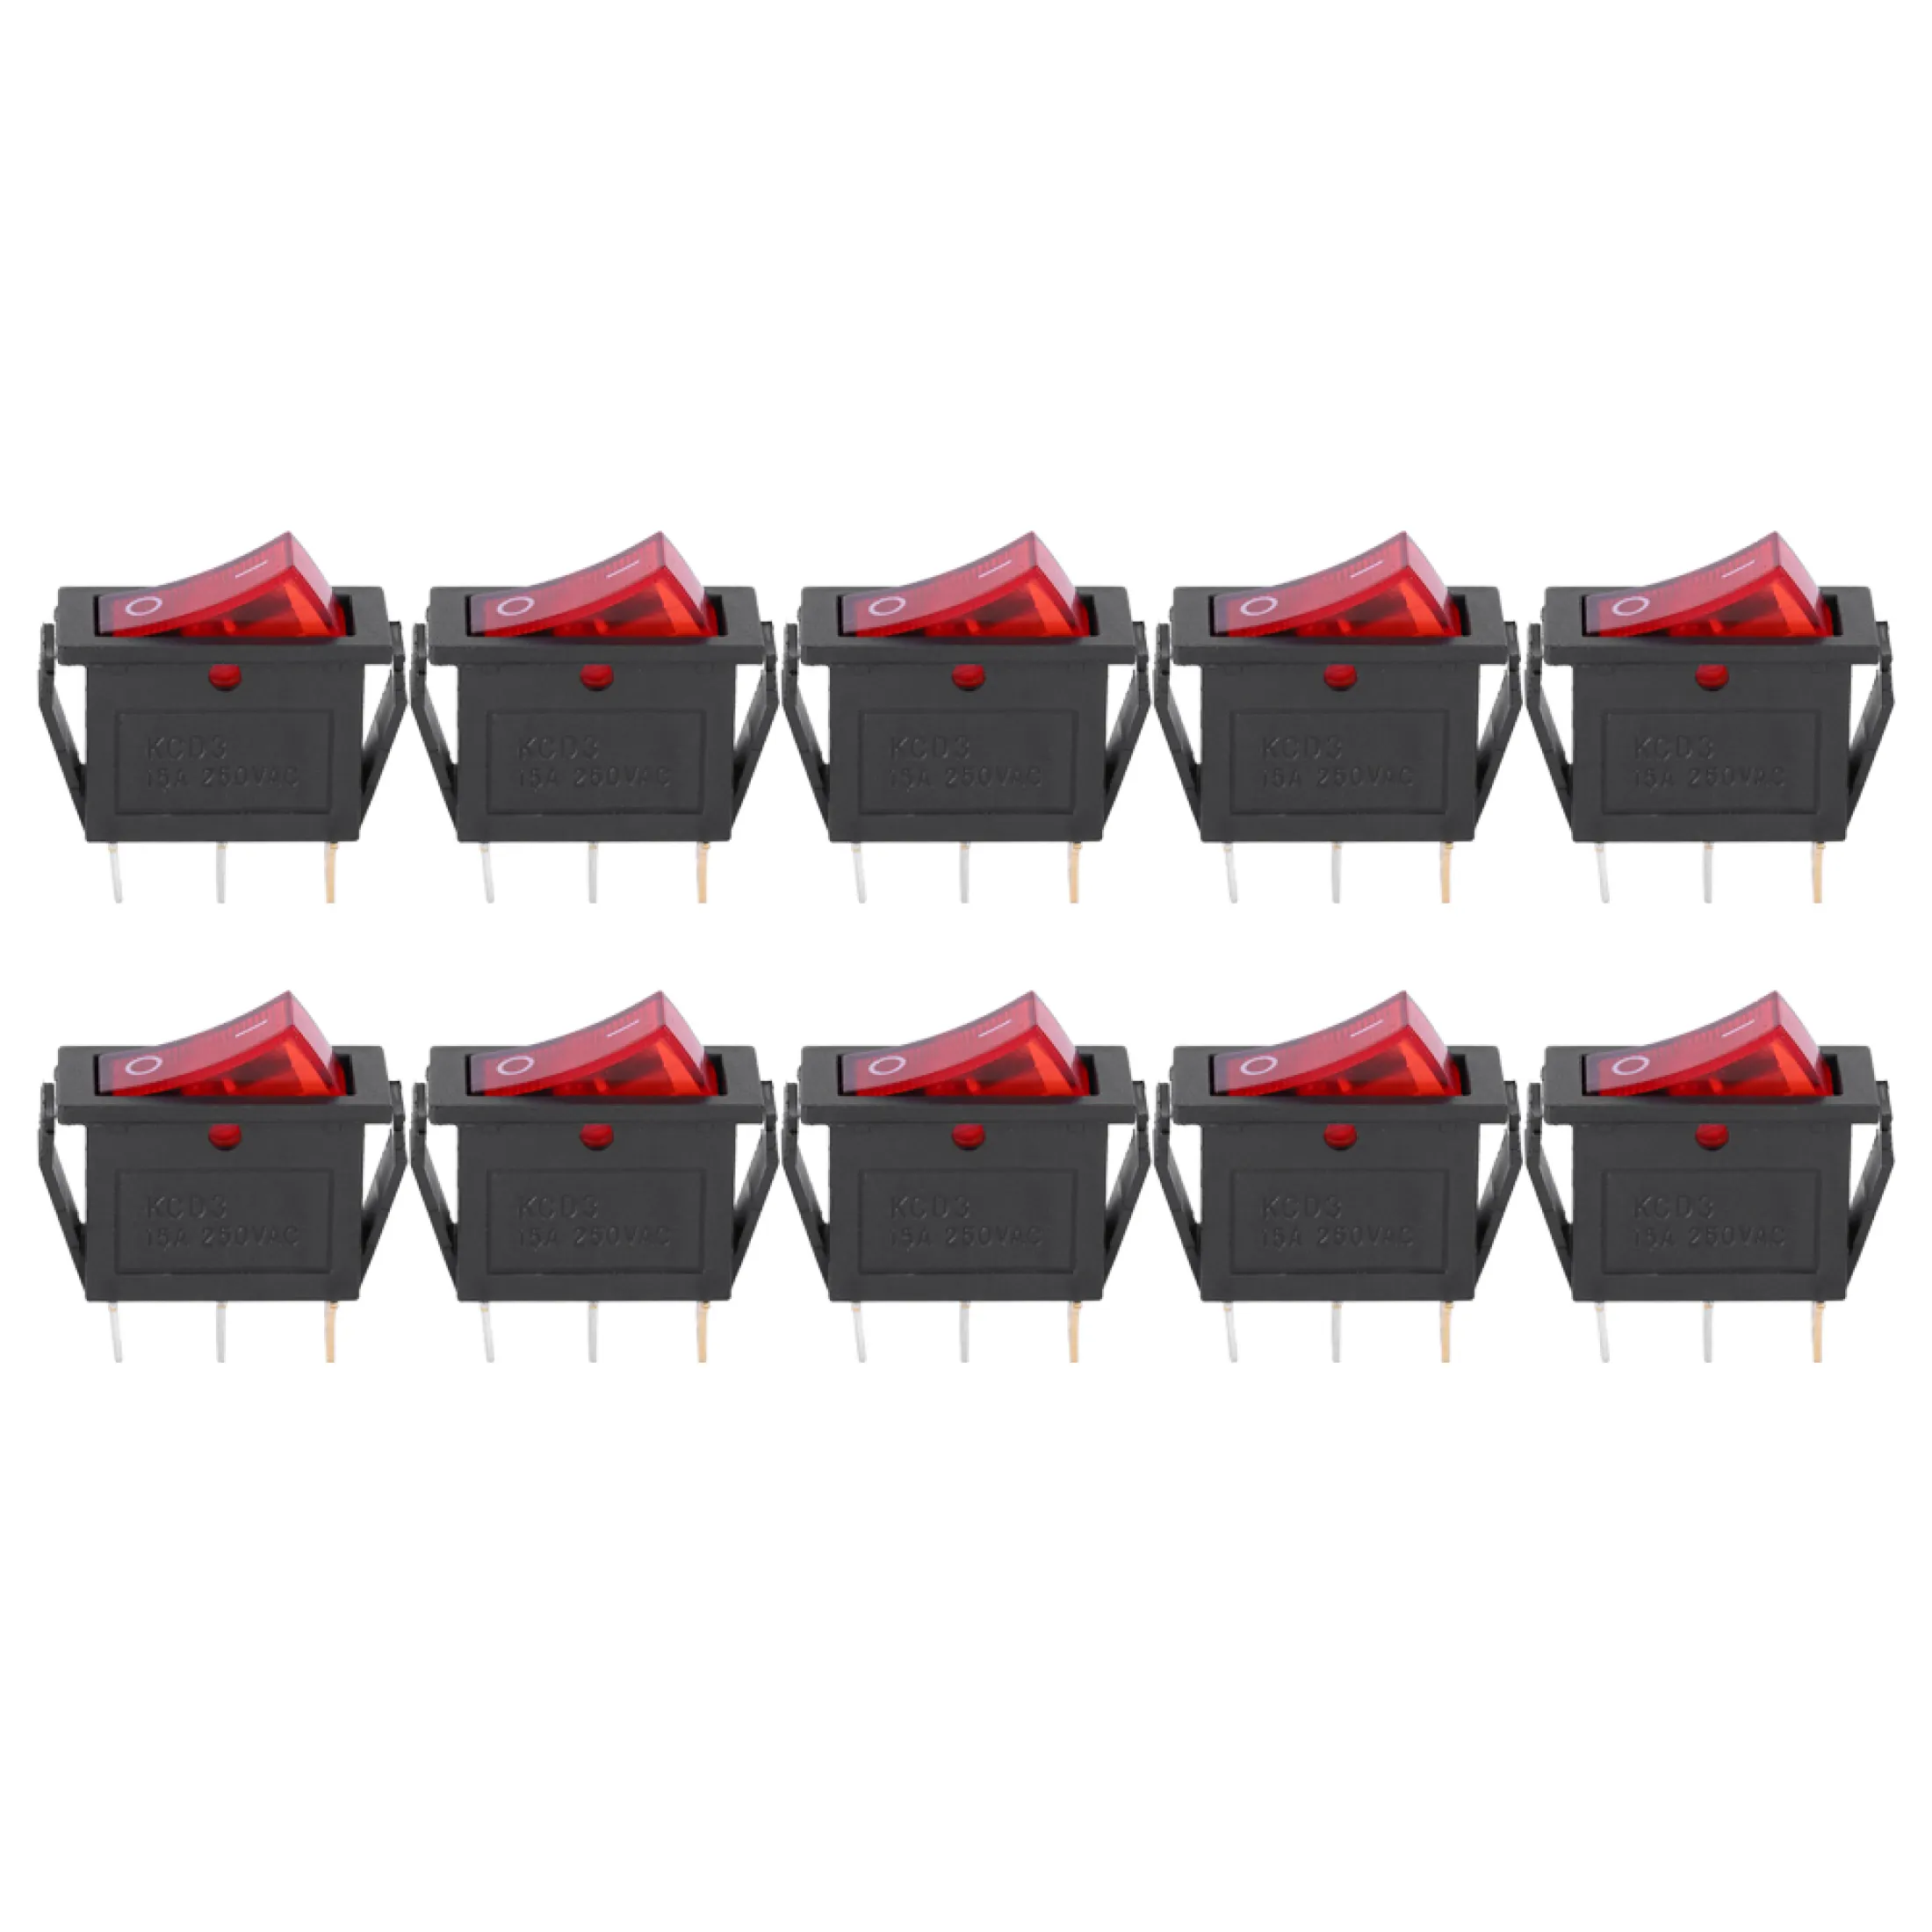 KCD3 Household Appliances Red Light Rocker Switch 10pcs On/Off for Household Working 